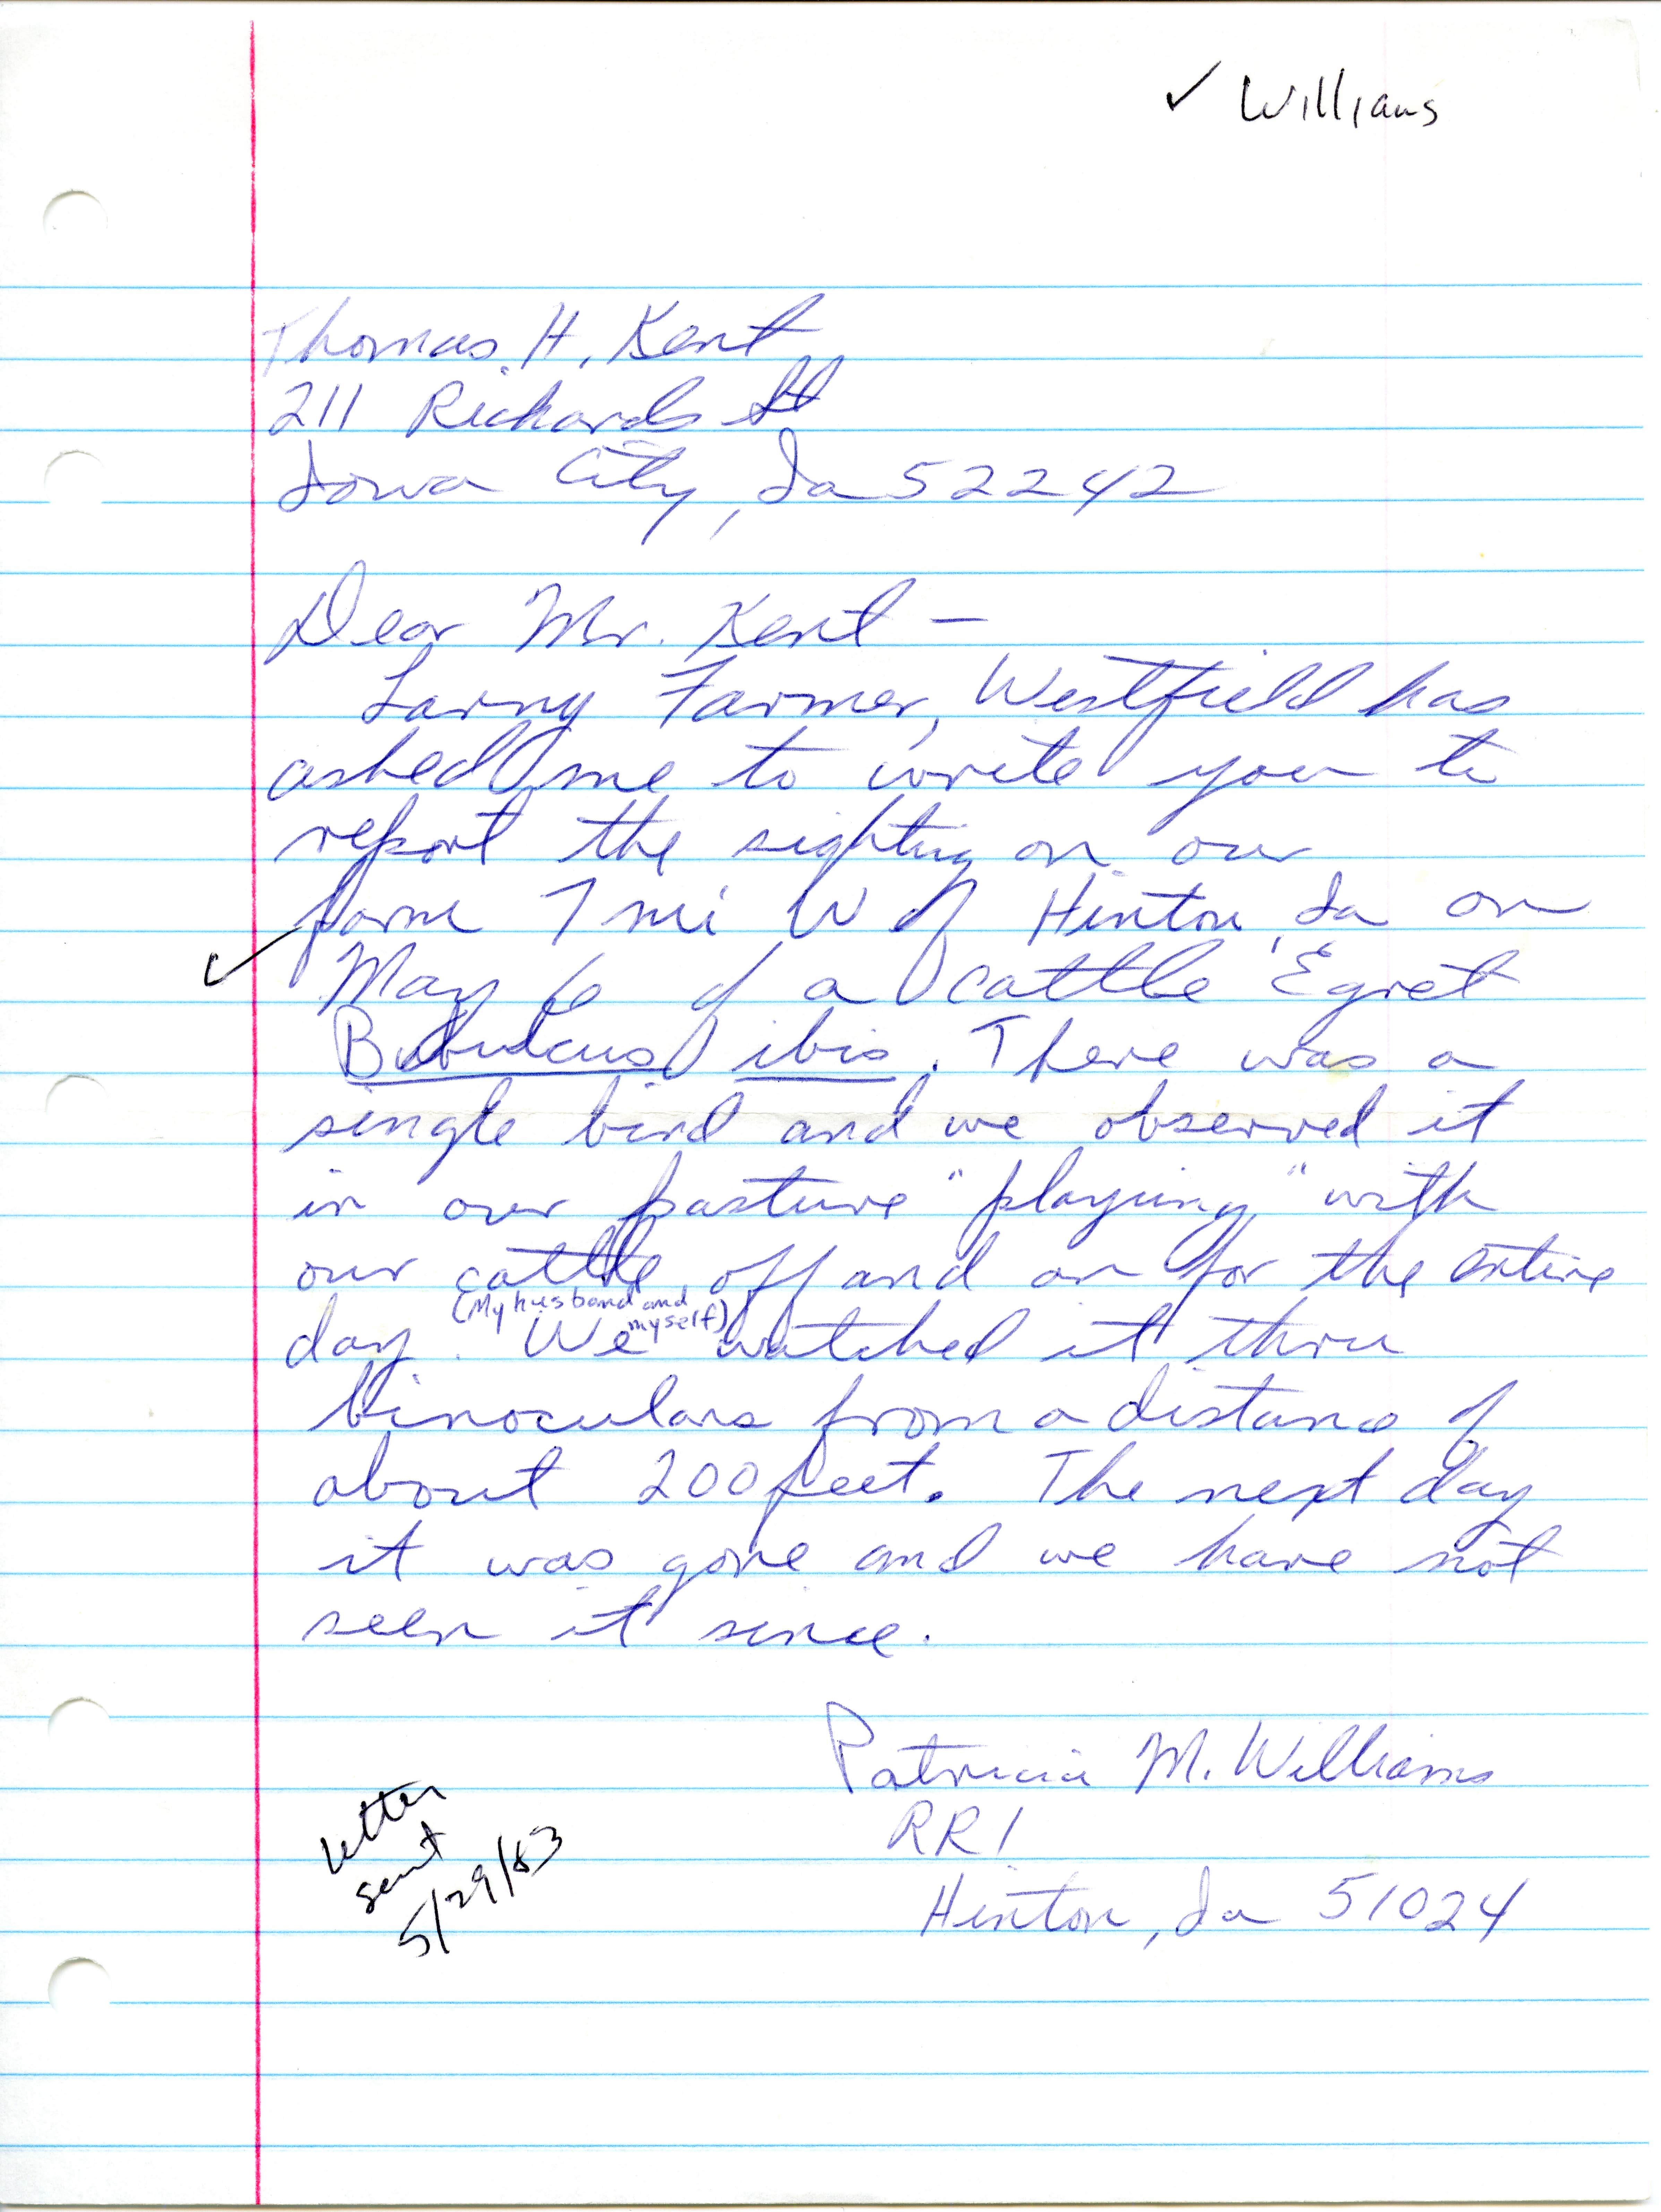 Patricia M. Williams letter to Thomas H. Kent regarding a Cattle Egret sighting, May 29, 1983